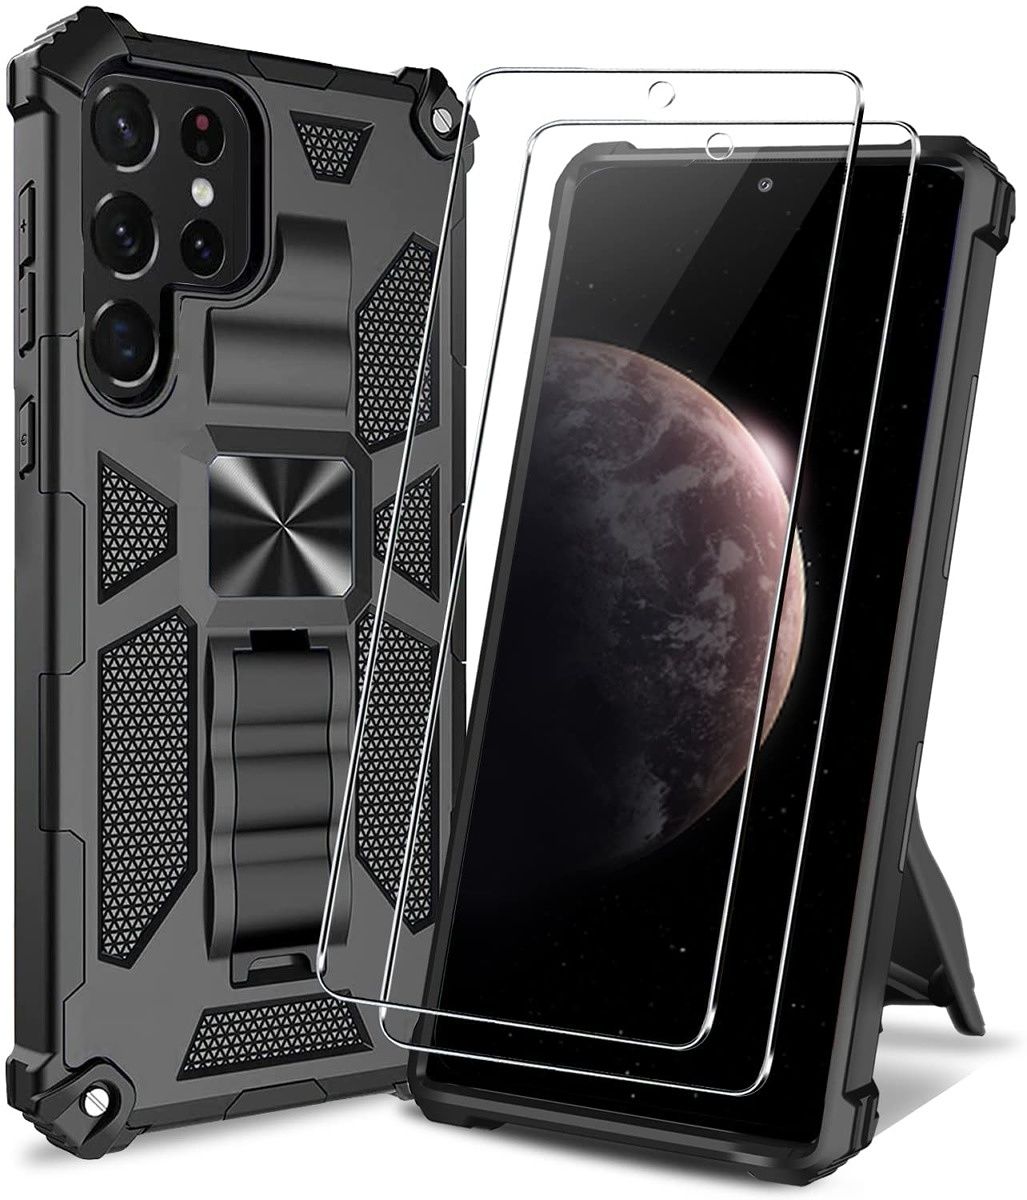 This tough case can keep your Galaxy S22 Ultra case from just about any drop or bump, plus it includes a built-in kickstand. It even comes in four colors and you get a screen protector included in the package.